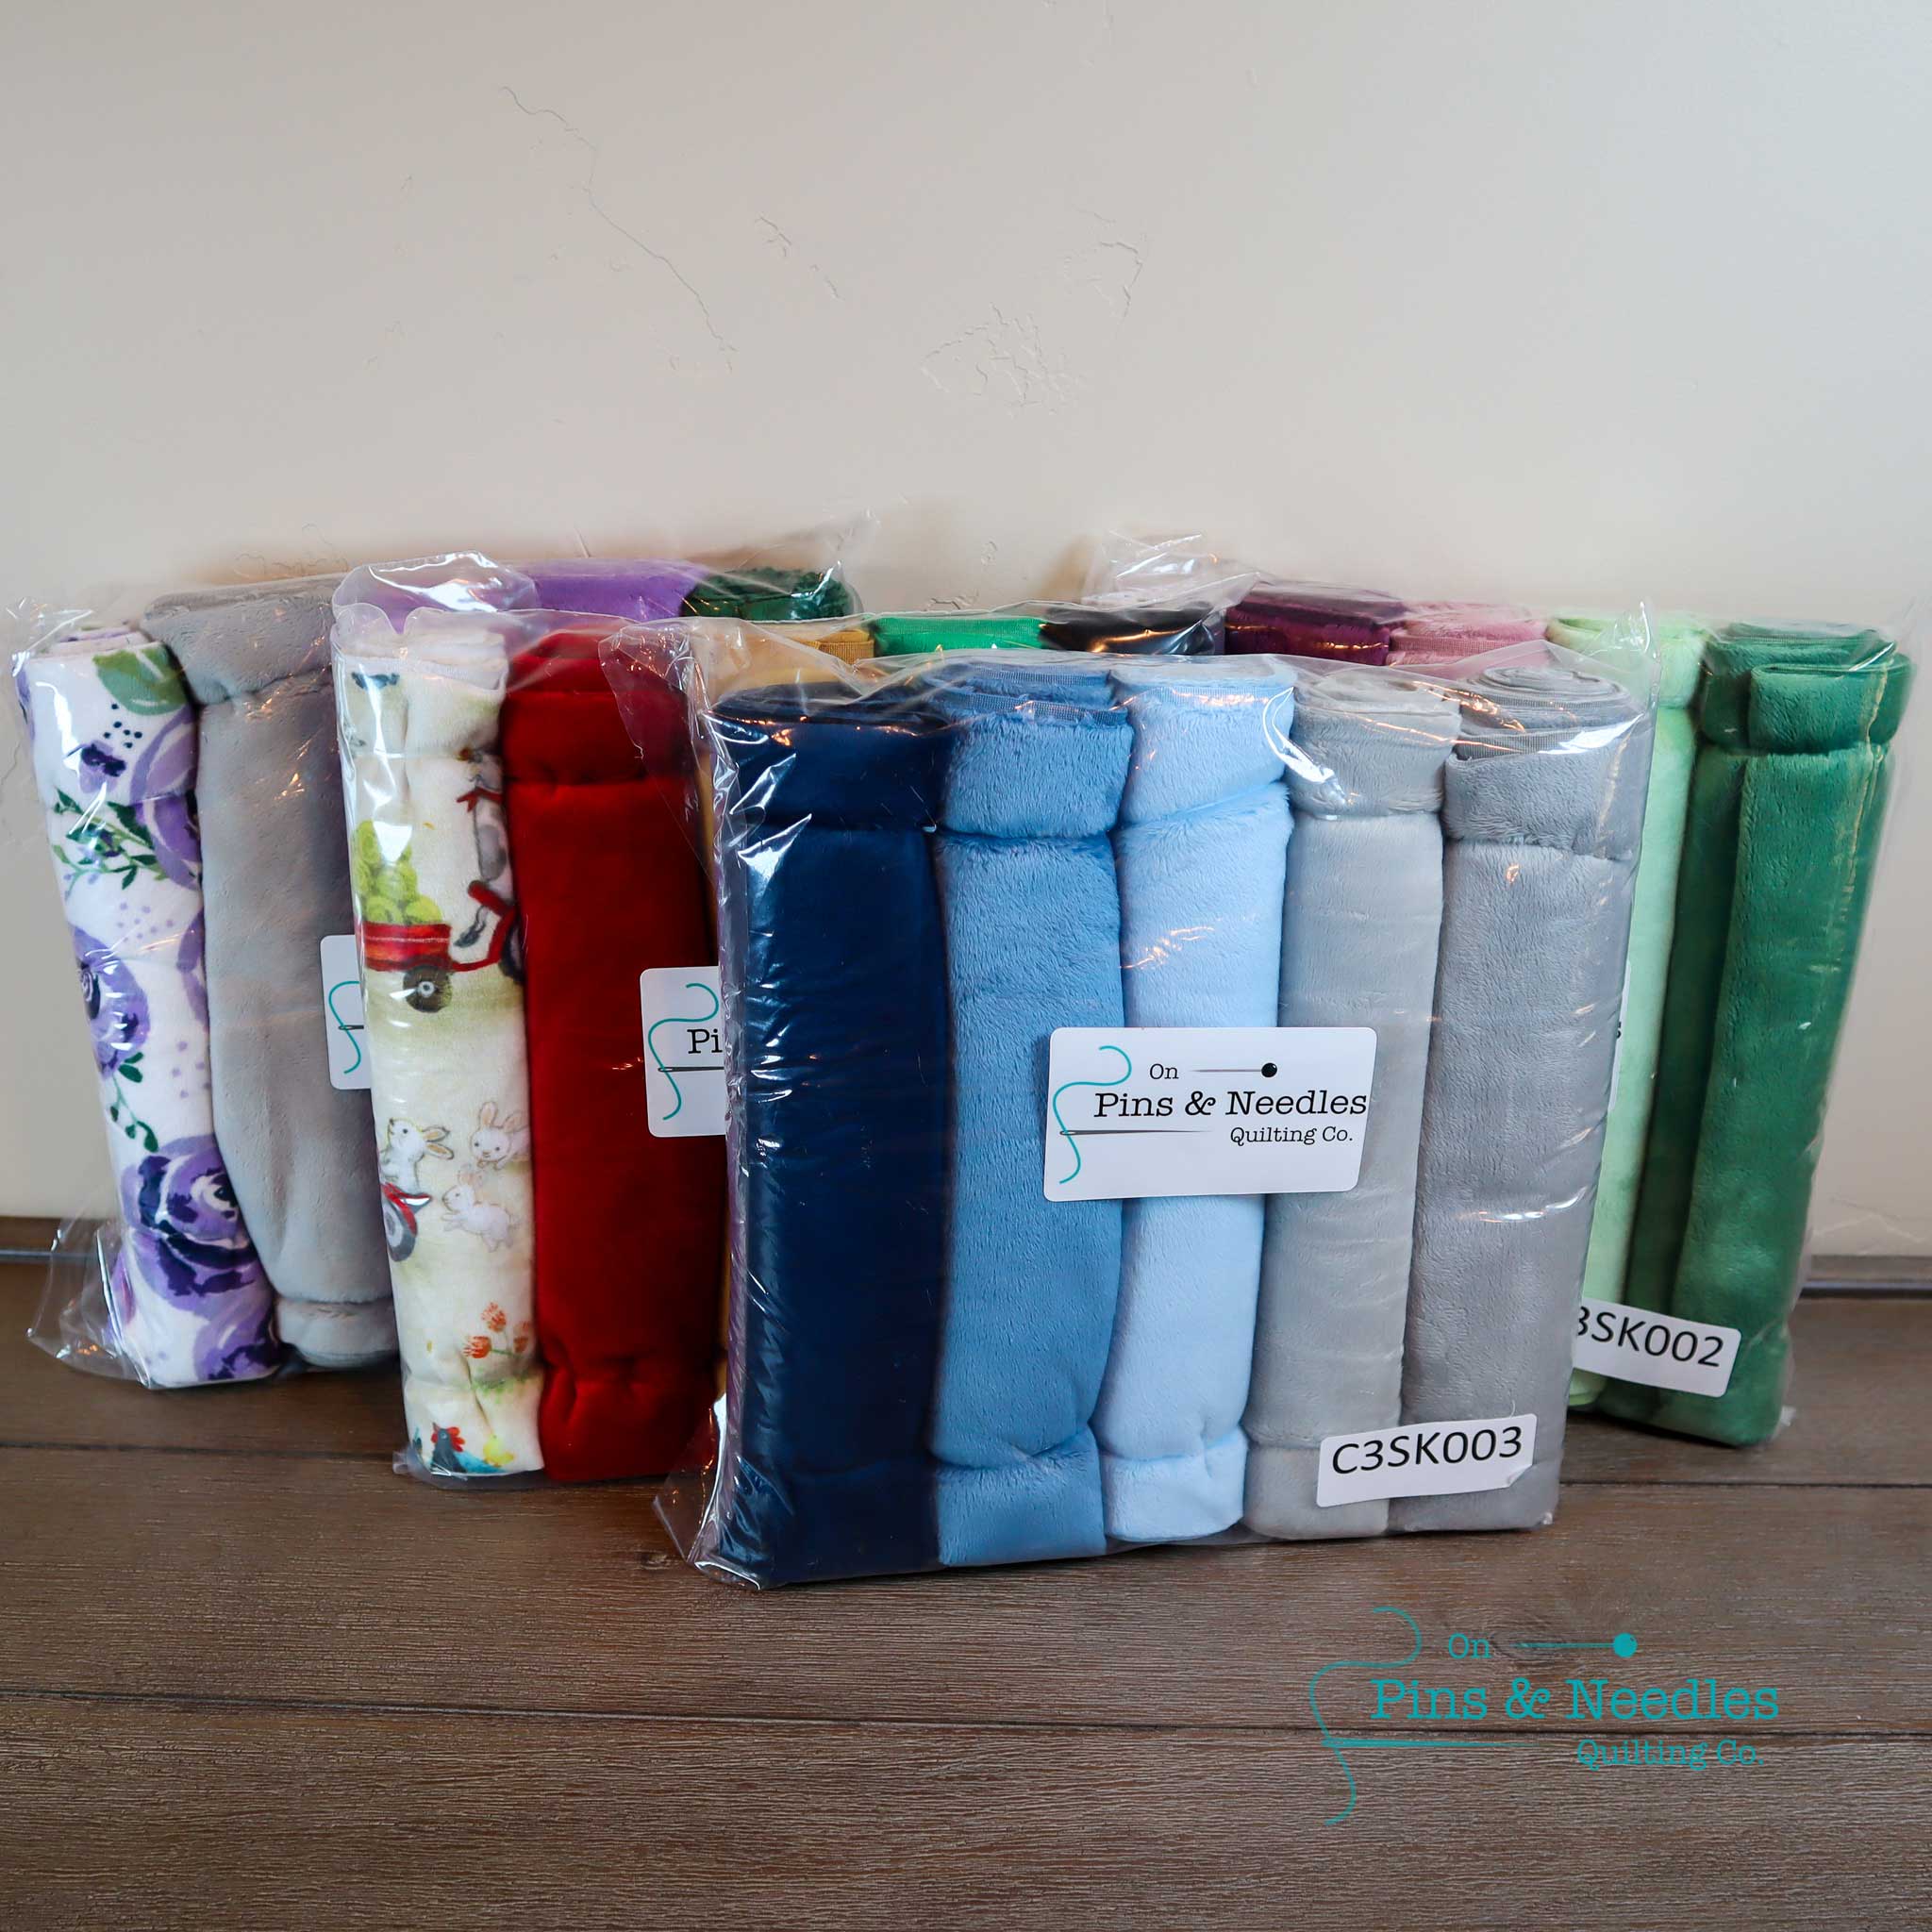 Limited Bundles 5 Pack of 10" x 60" Cuddle Strips - Shannon Fabrics - On Pins & Needles Quilting Co.